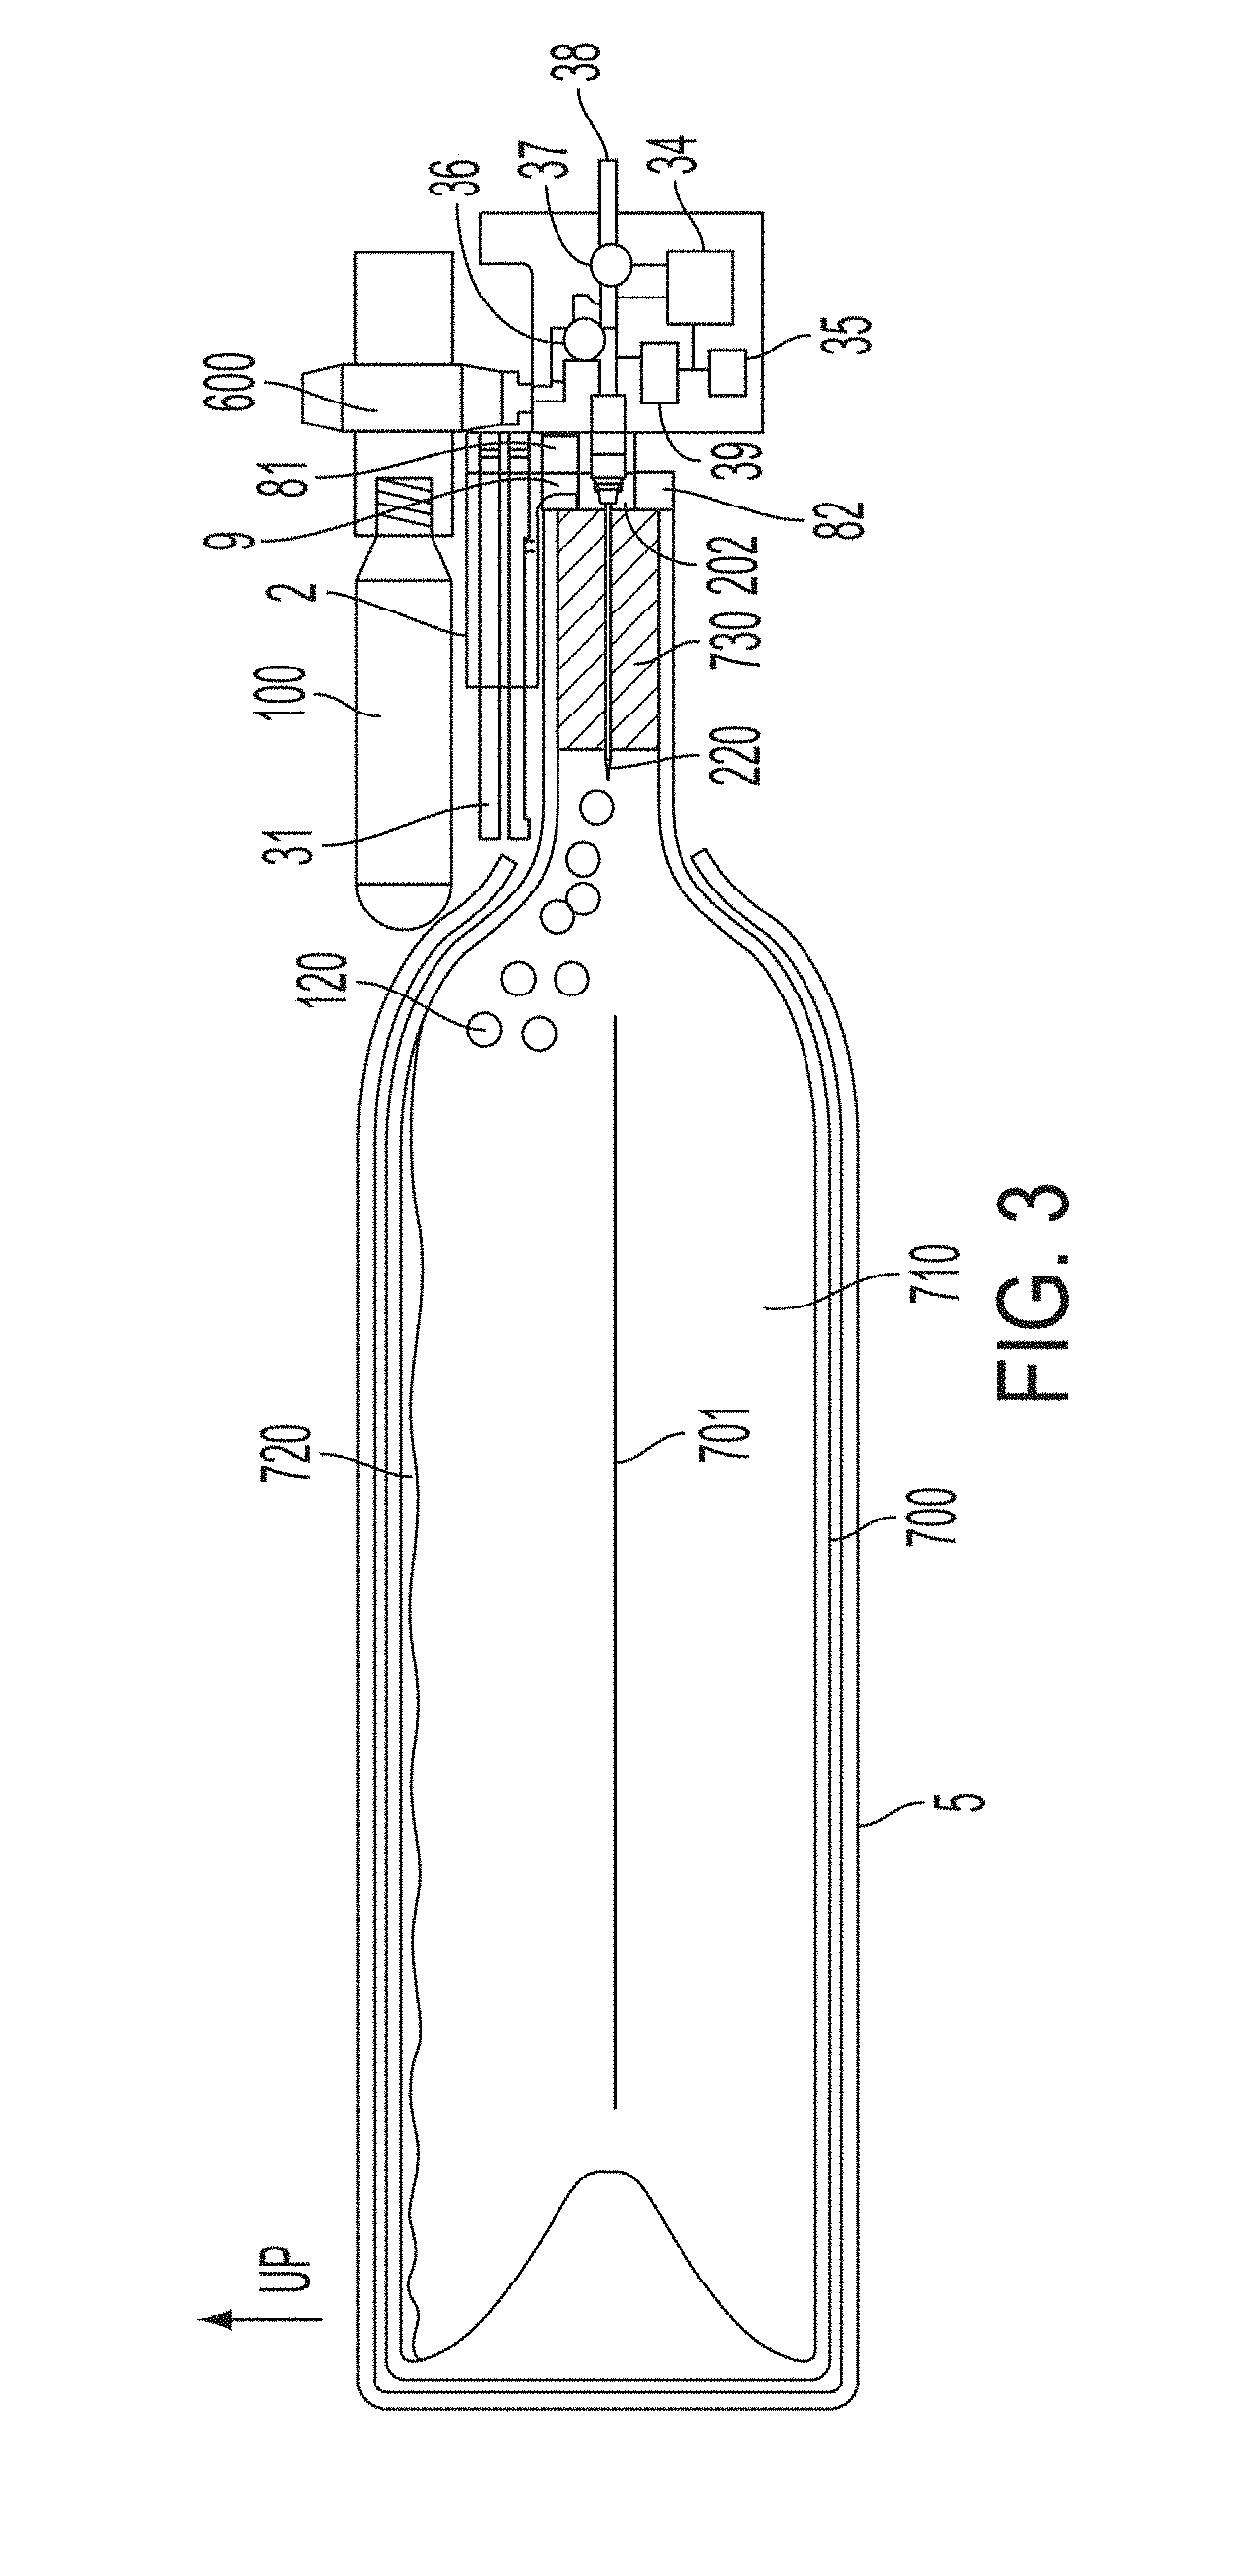 Beverage dispenser with container engagement features